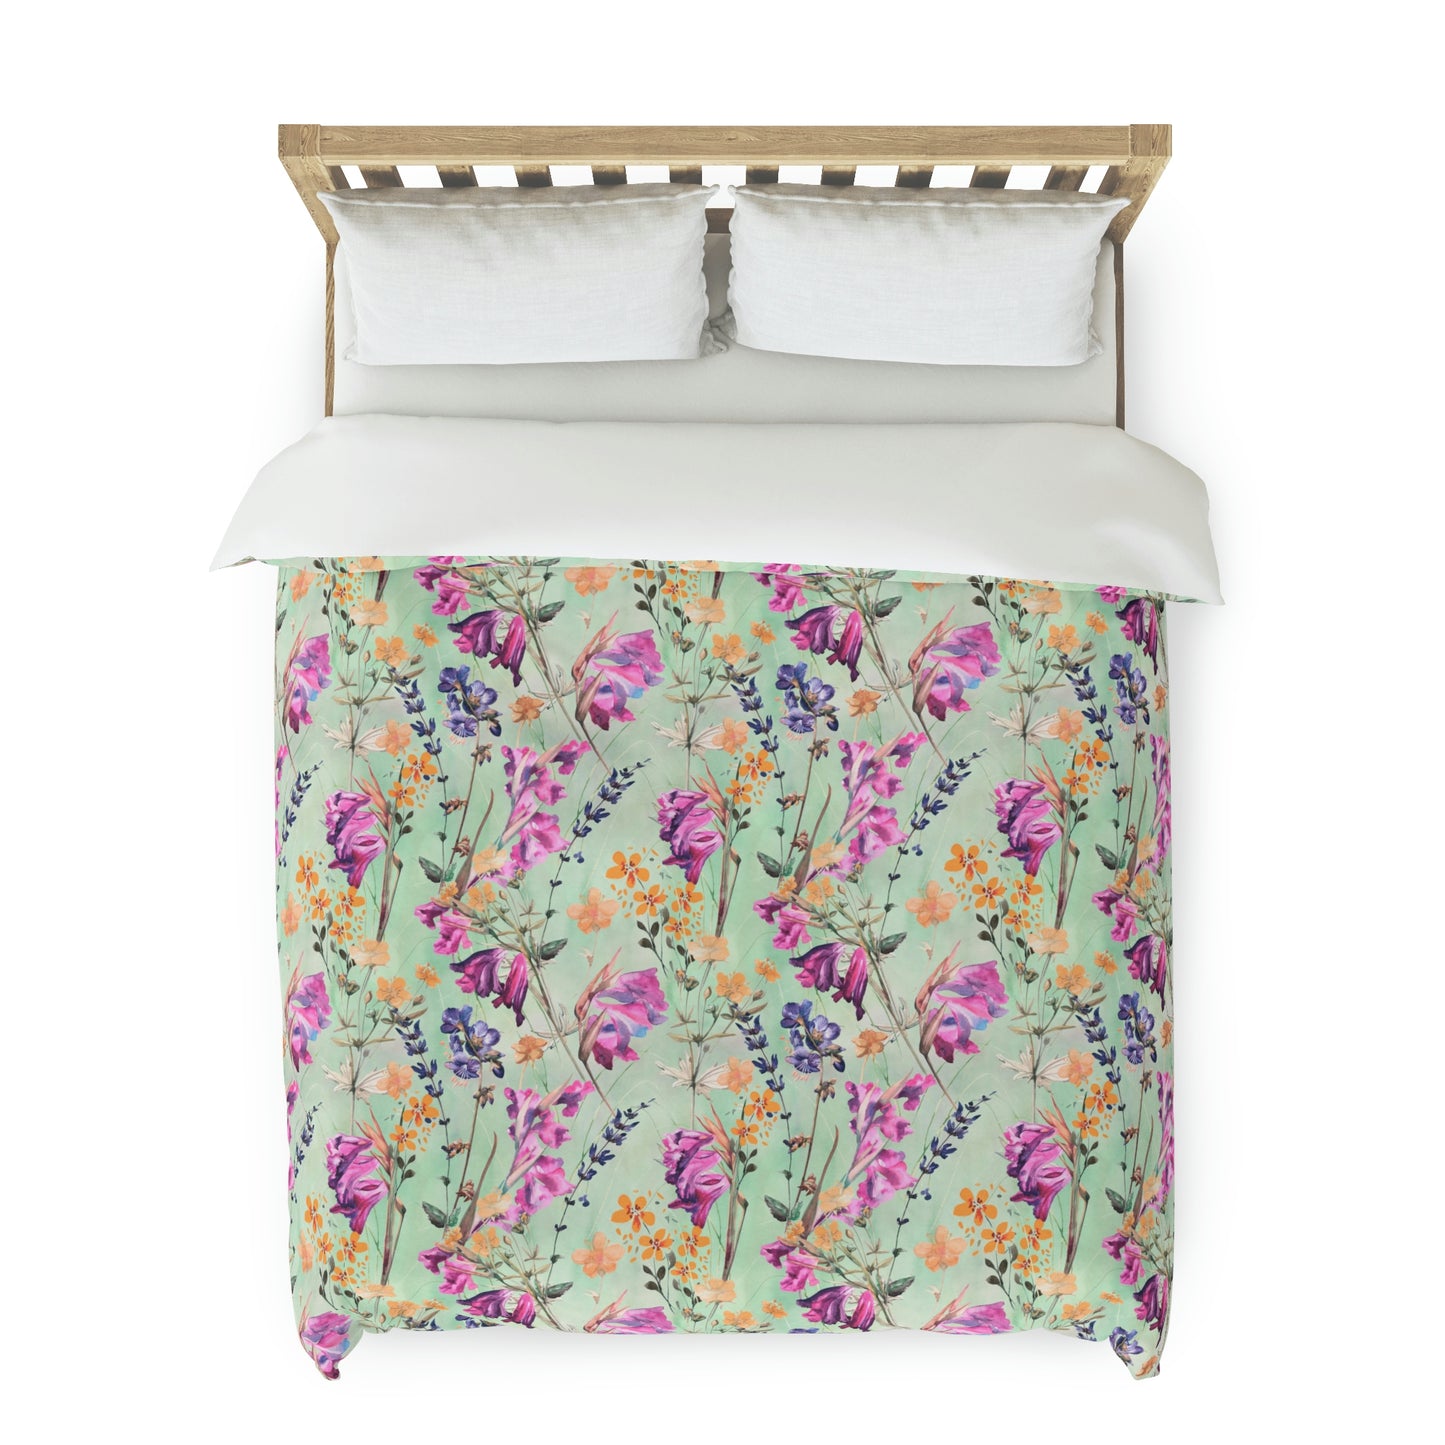 Mint Green & Purple Floral Pattern Duvet Cover lying on a bed, microfiber duvet cover bedroom accent